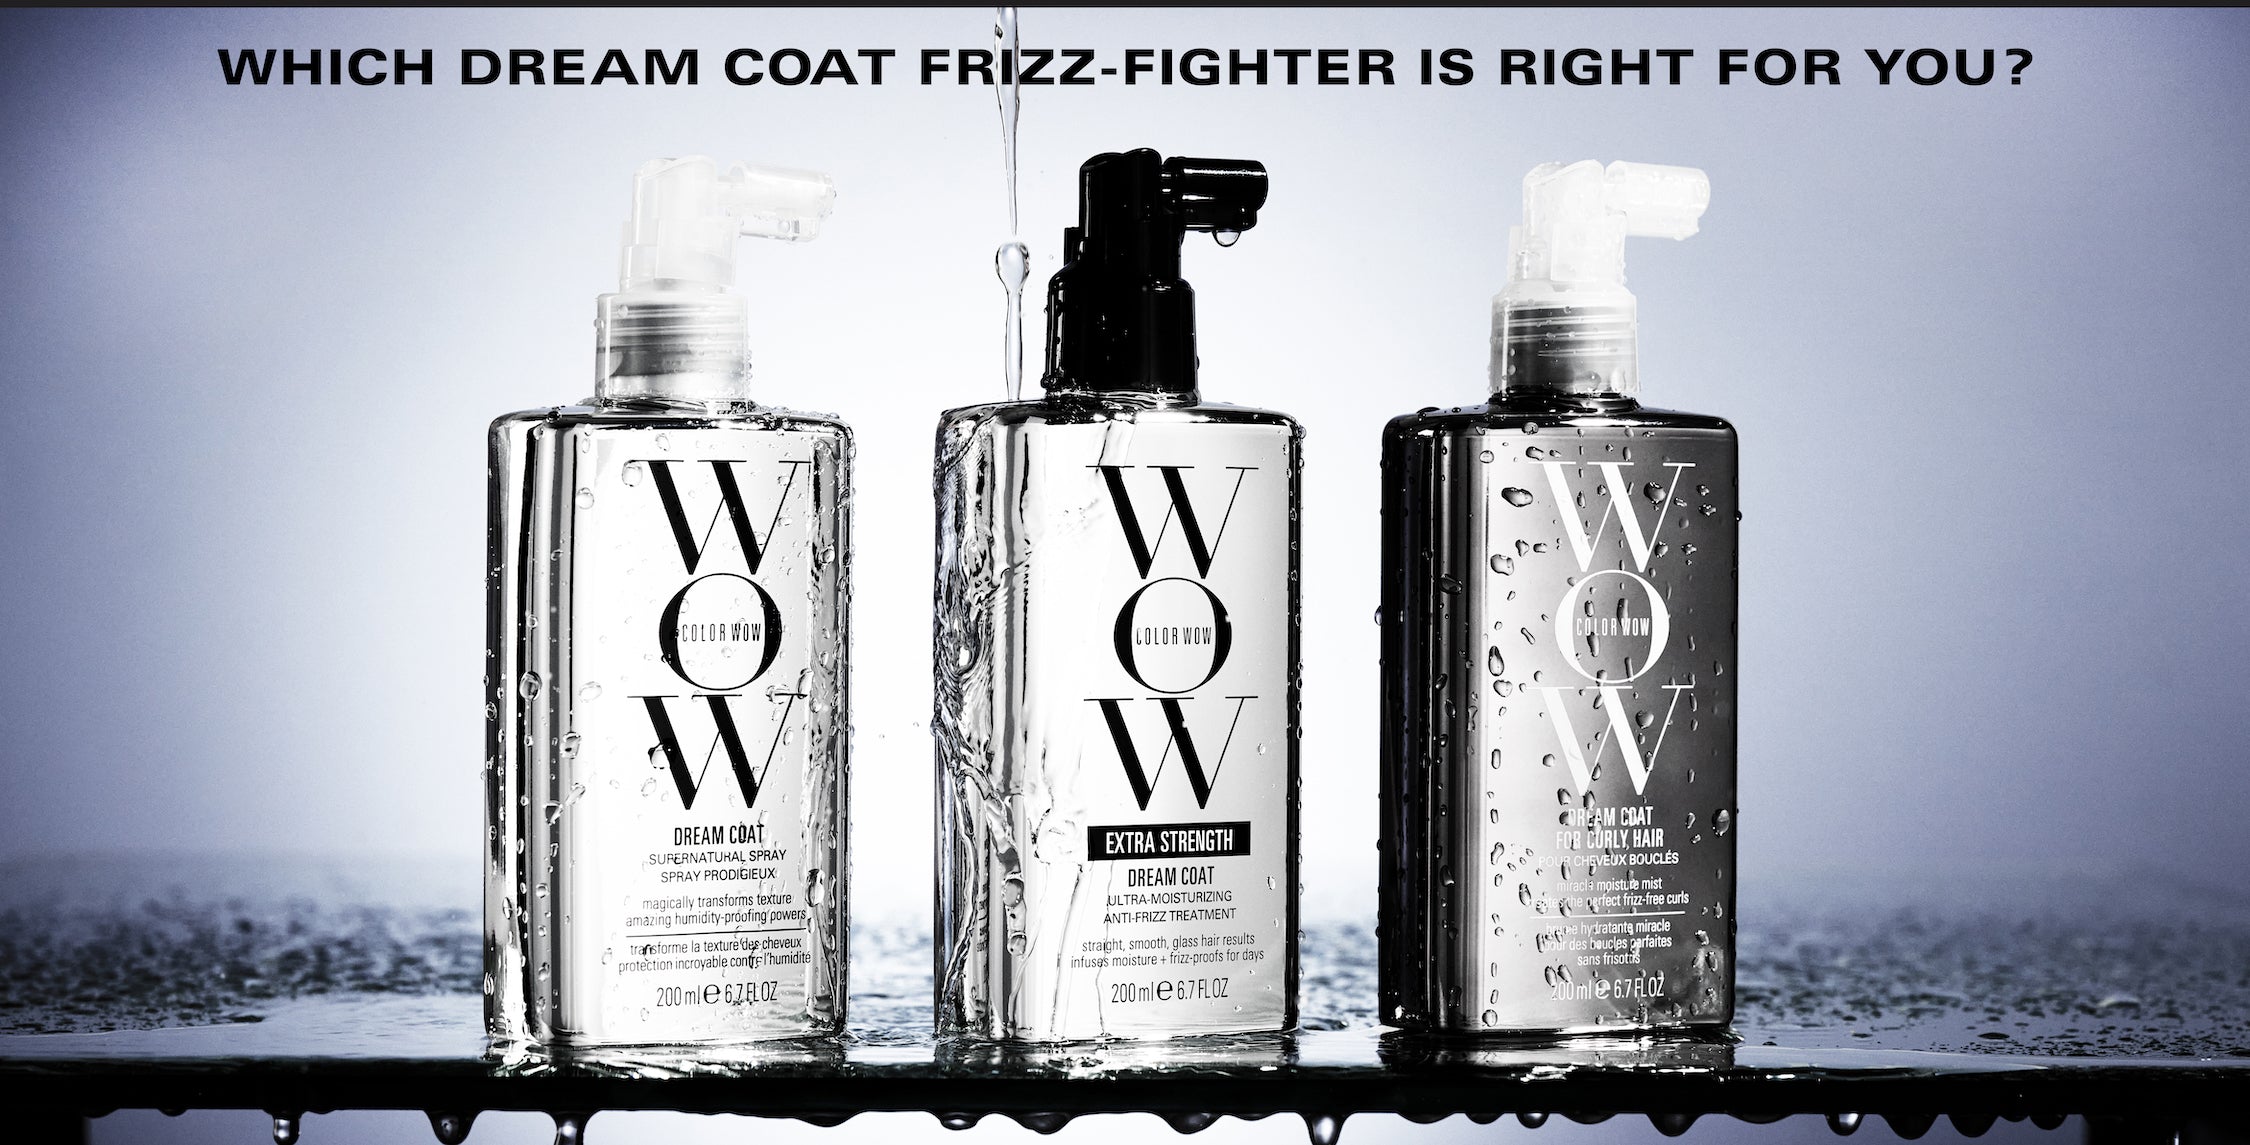  COLOR WOW Dream Coat for Curly Hair - Frizz-Free Curls